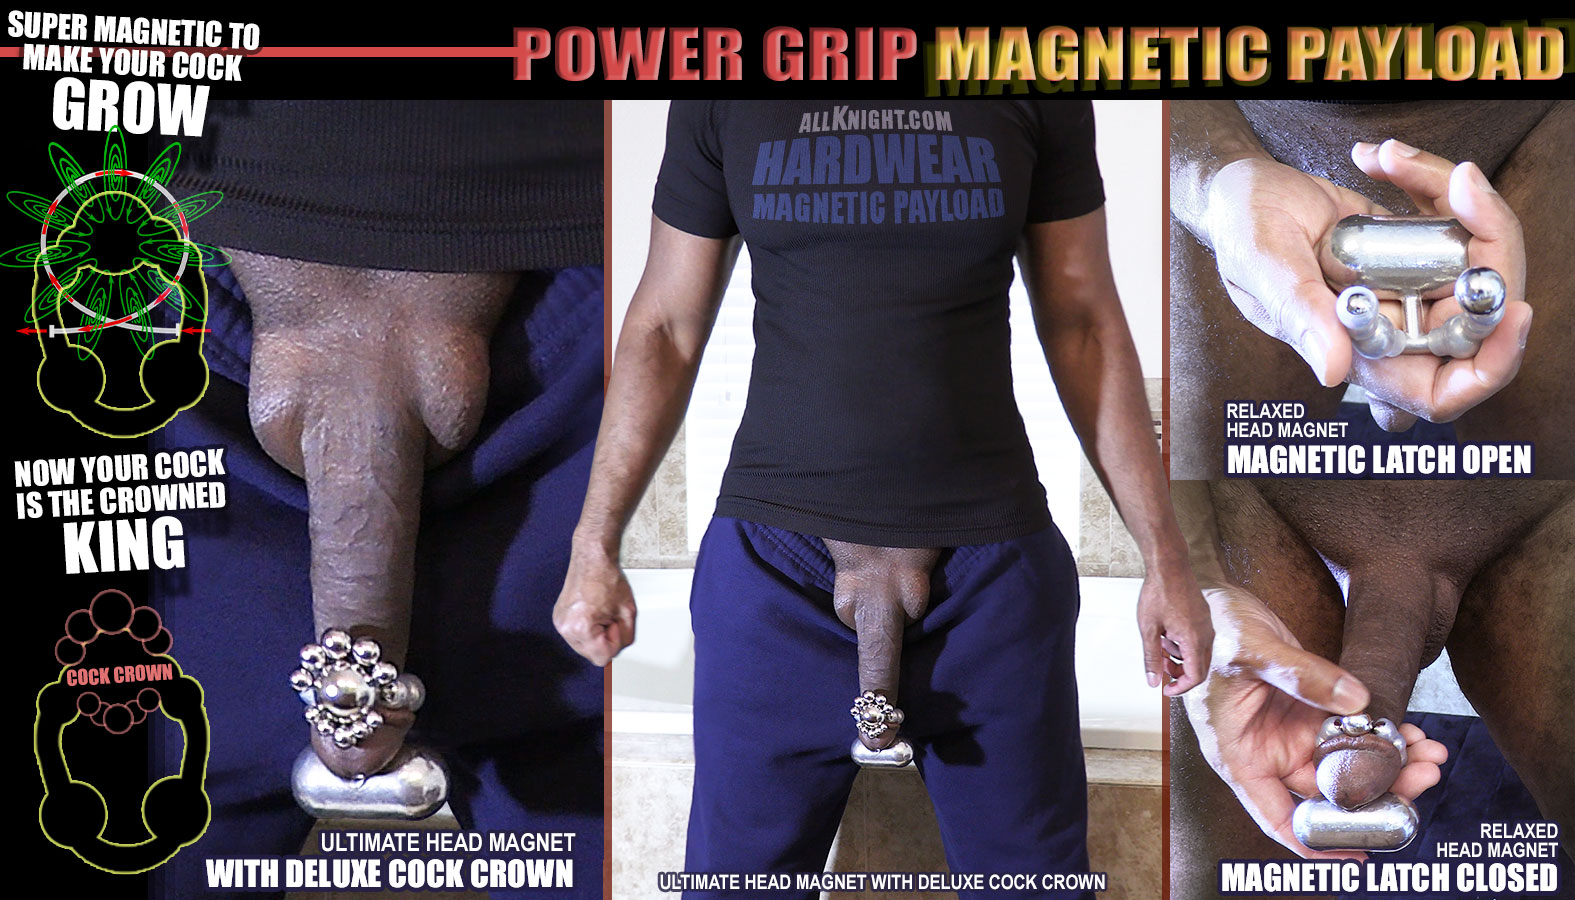 A big swinging dick is what it&rsquo;s all about: in your sweats, in the locker room, in the bedroom, and this gear is the perfect workout equipment to get your sausage in shape.